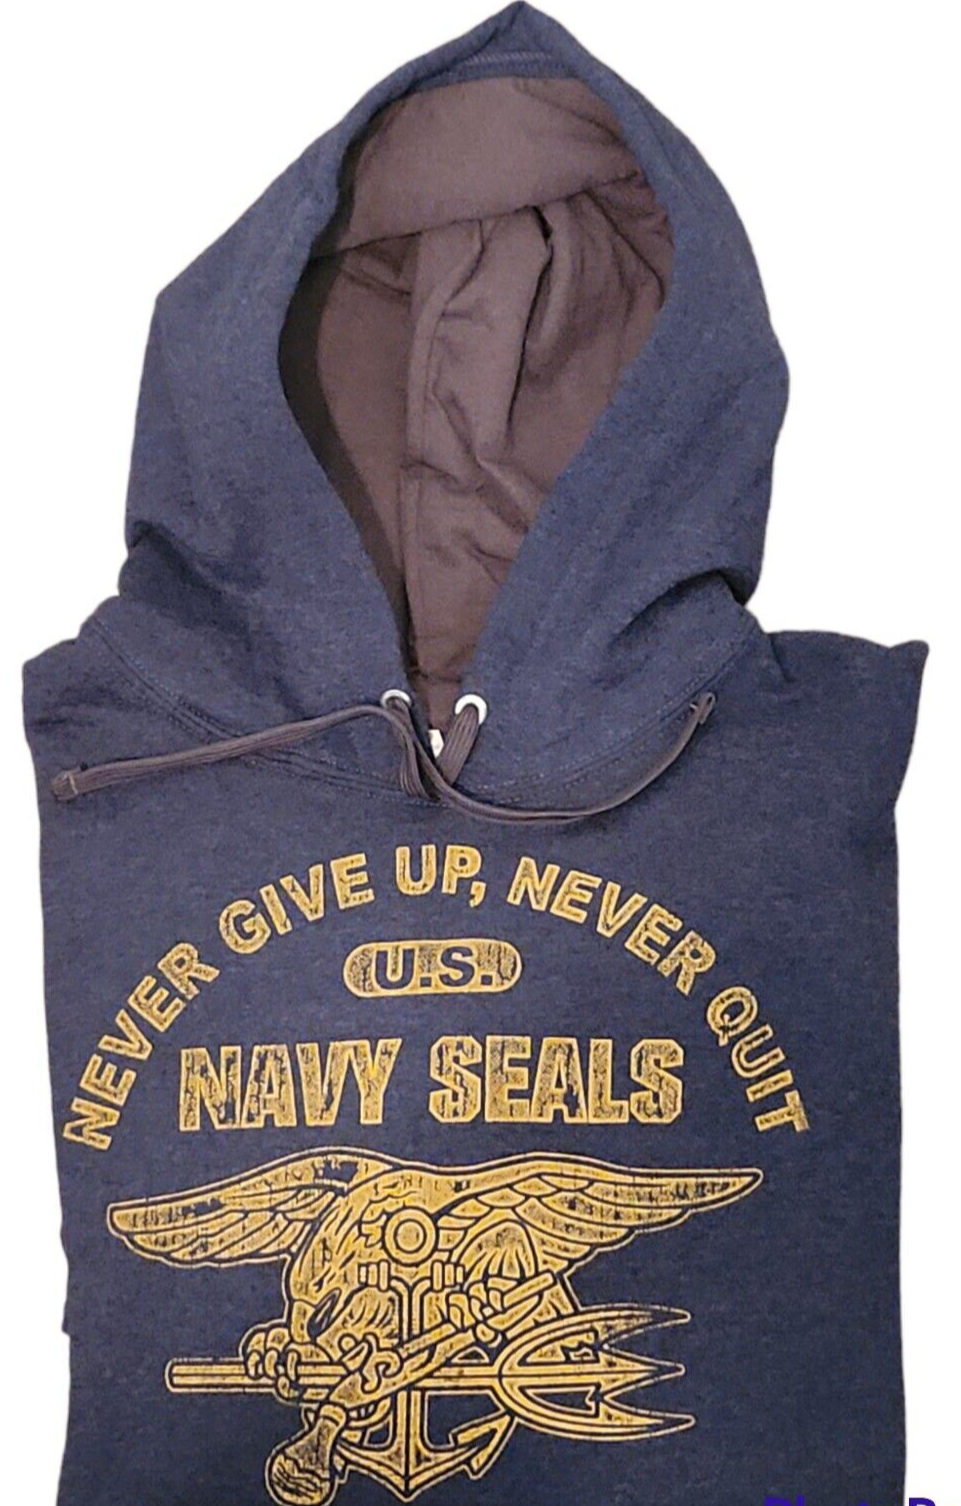 Sweat Shirt- NAVY SEALS "Never Give Up Never Quit" Heather Blue